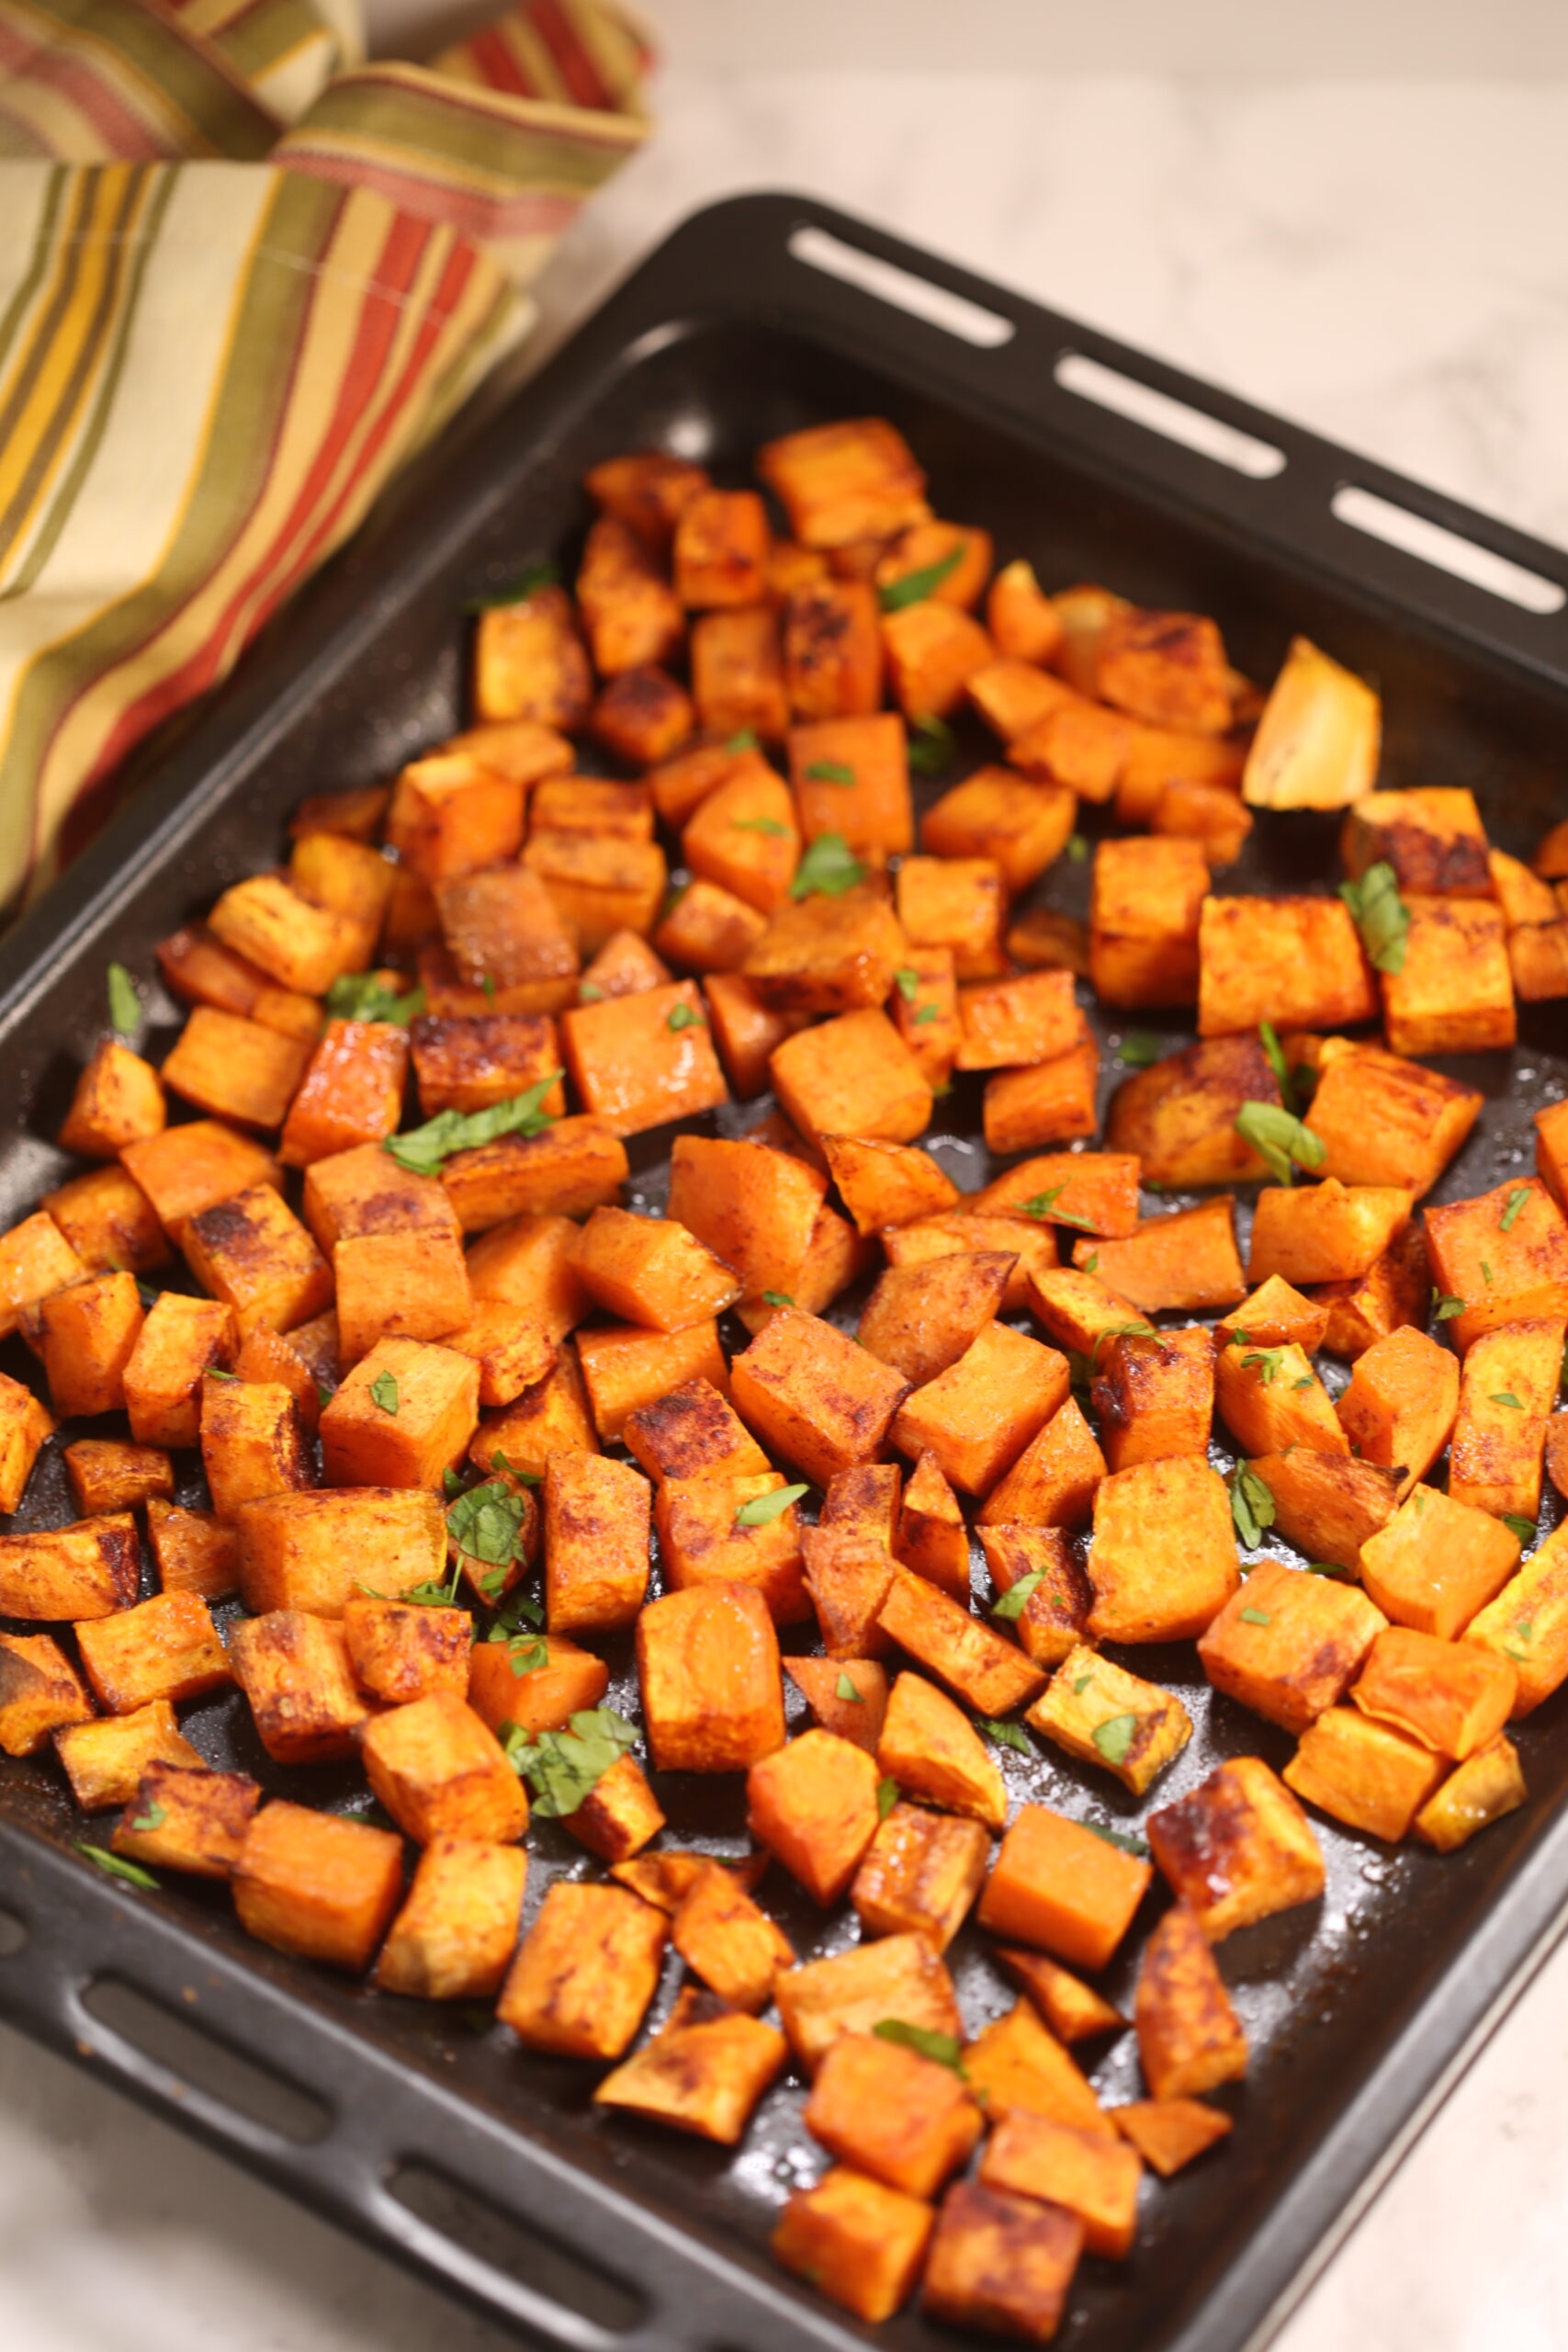 A pan of the cubed potatoes.